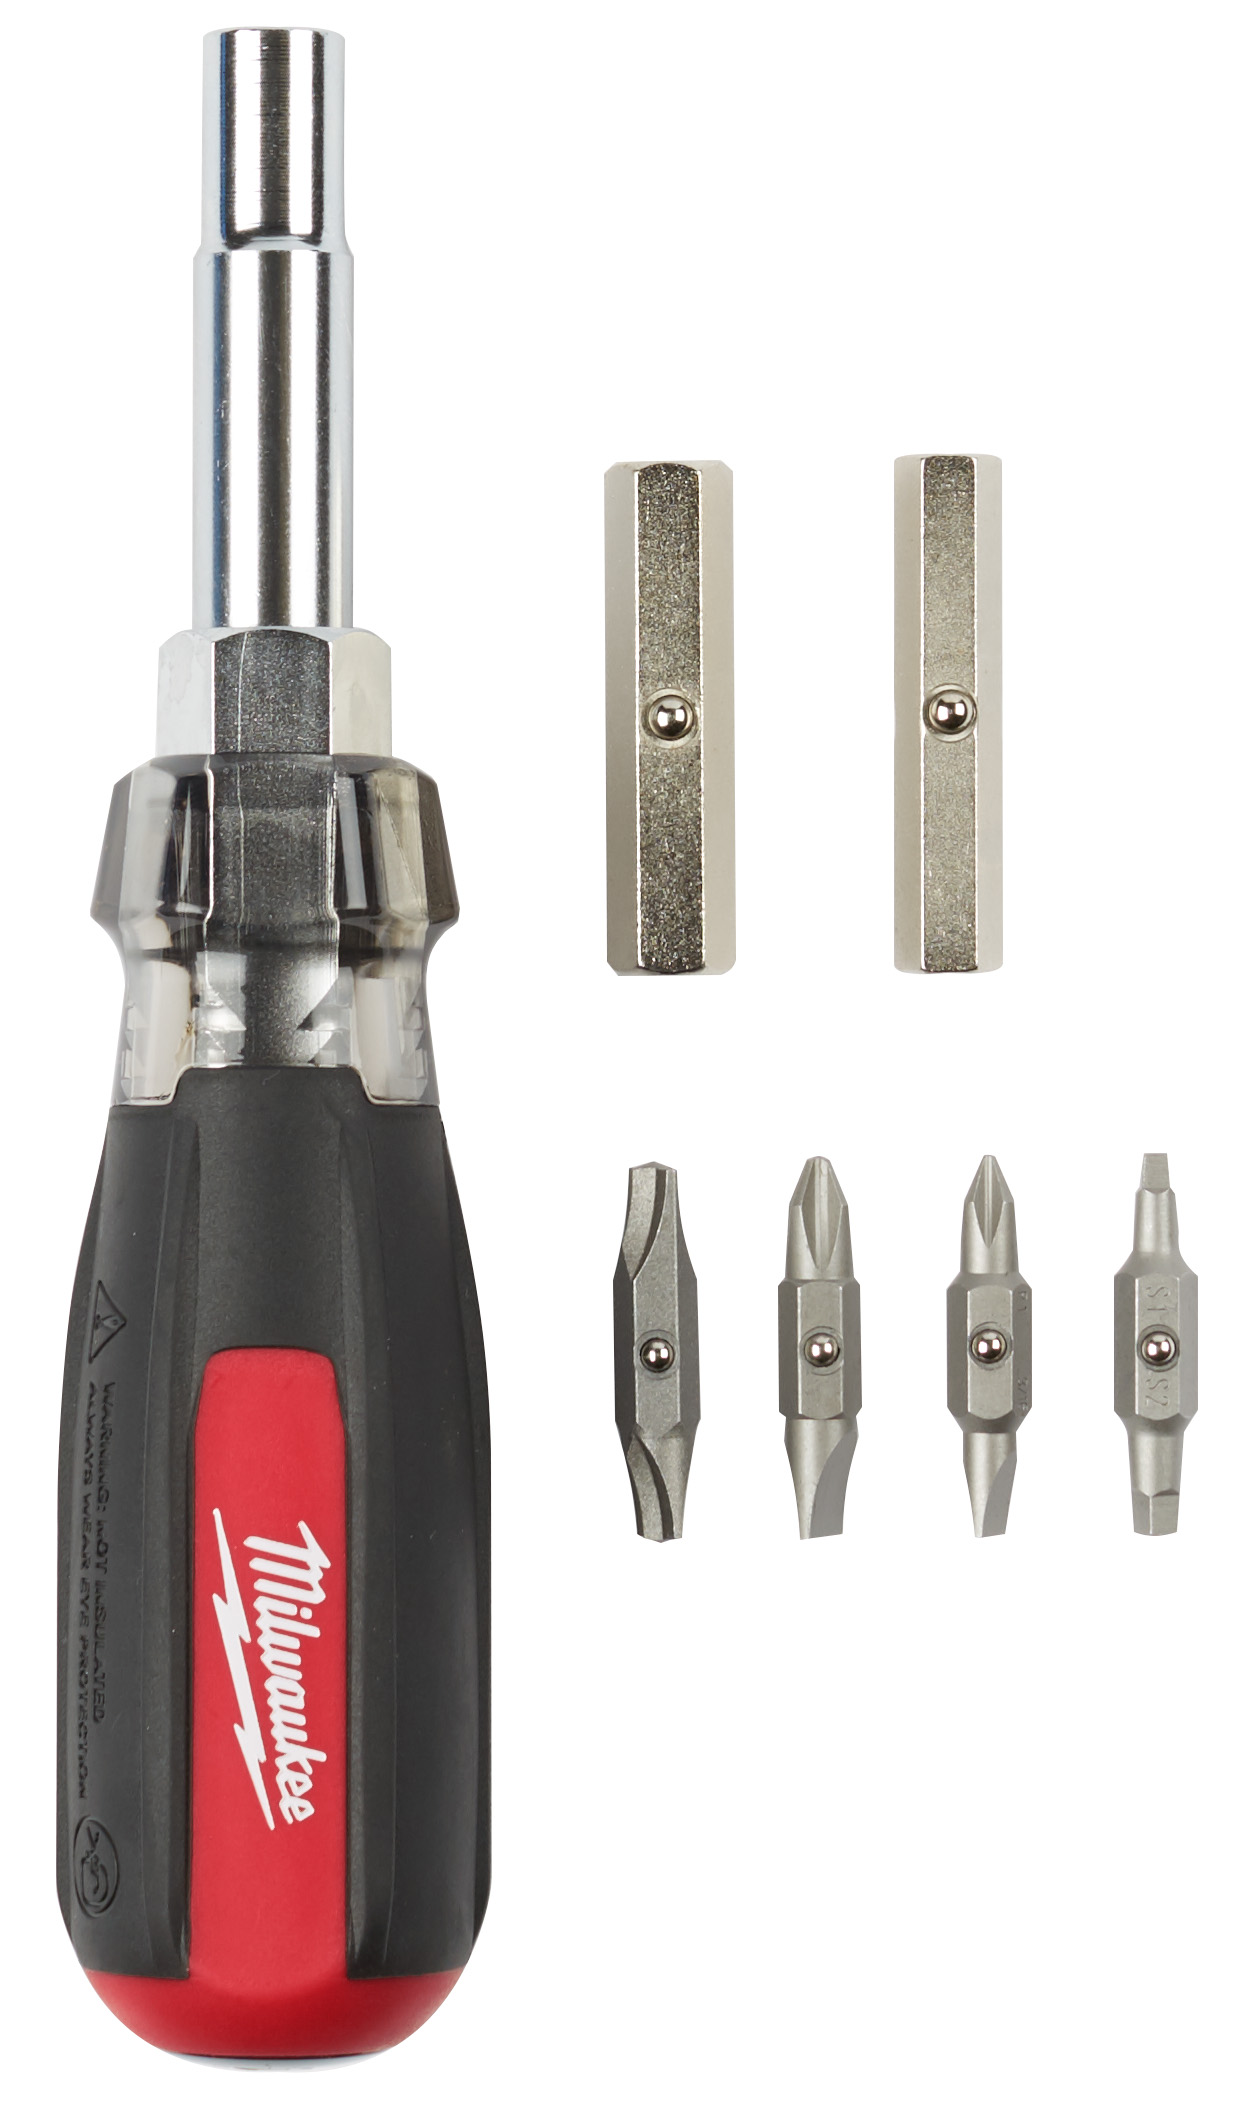 The Milwaukee 13 in. 1 cushion grip screwdriver features 13 unique functions, ultimately reducing the number of tools a user must carry. The 13-in-1 screwdriver includes the 8 bits and 4 nut drivers most requested by professionals. The bit prevents bit wear from hardened screws and extends bit life when fastening specialty screws found in electrical boxes, conduit couplers, outlets and other common job site fixtures. The tri-material cushion grip handle offers best-in-class durability and will not peel. Covered by Milwaukee's Limited Lifetime Warranty.